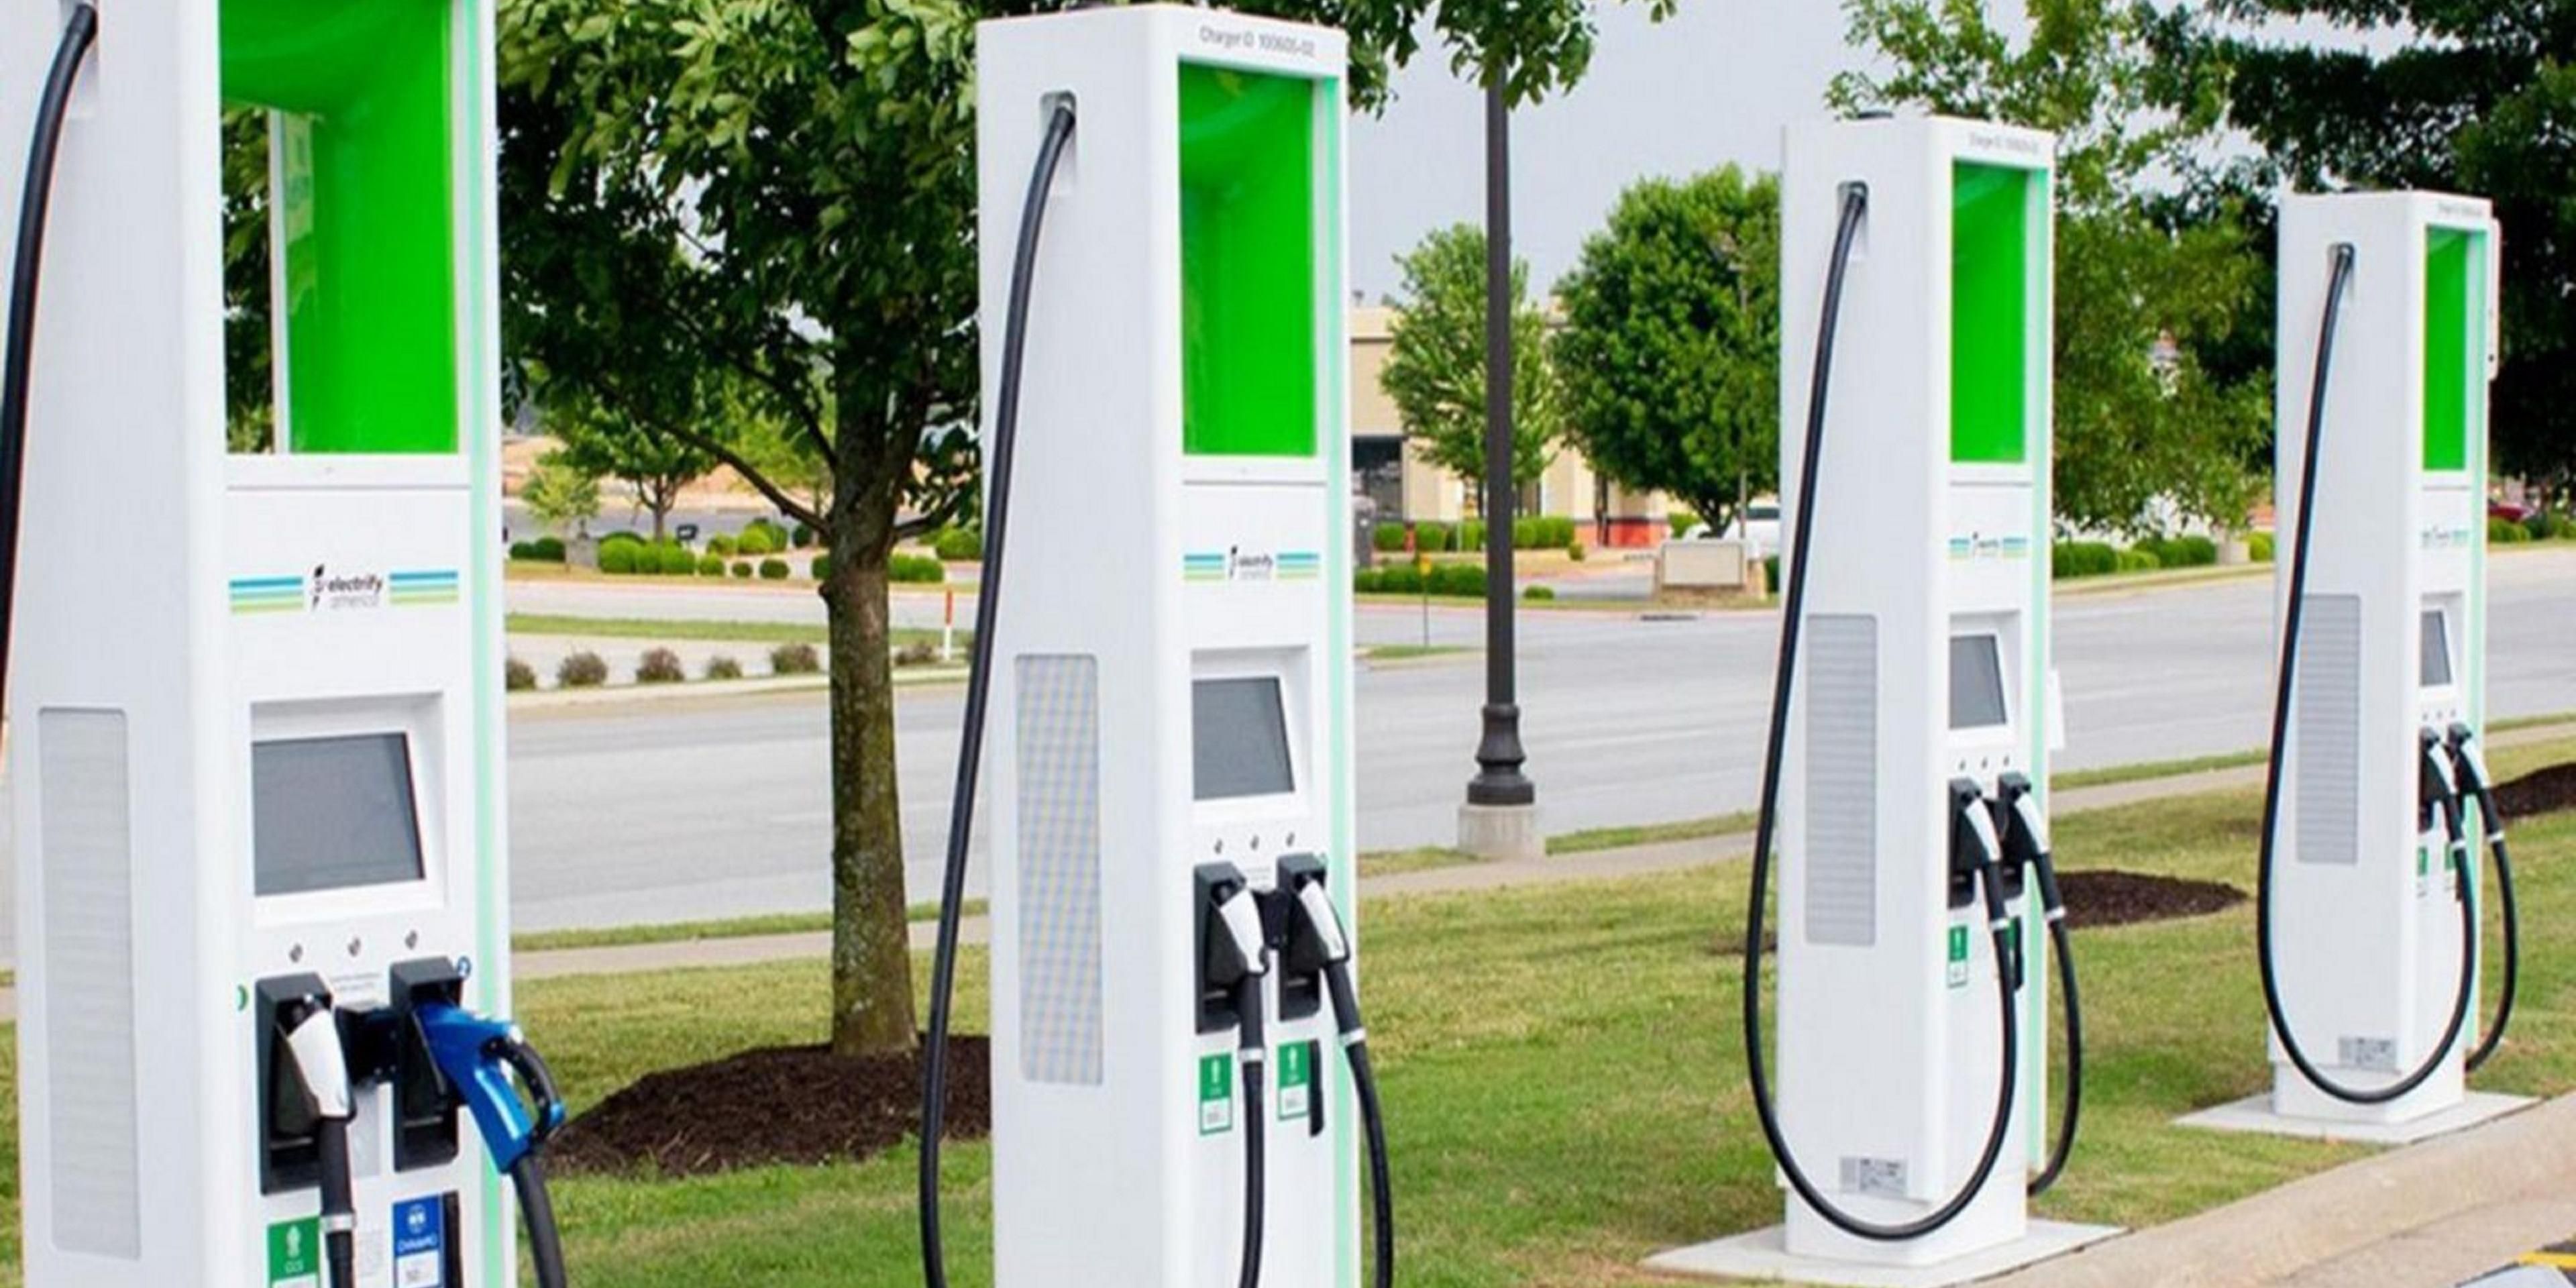 Enjoy electric charging stations at our facility.
